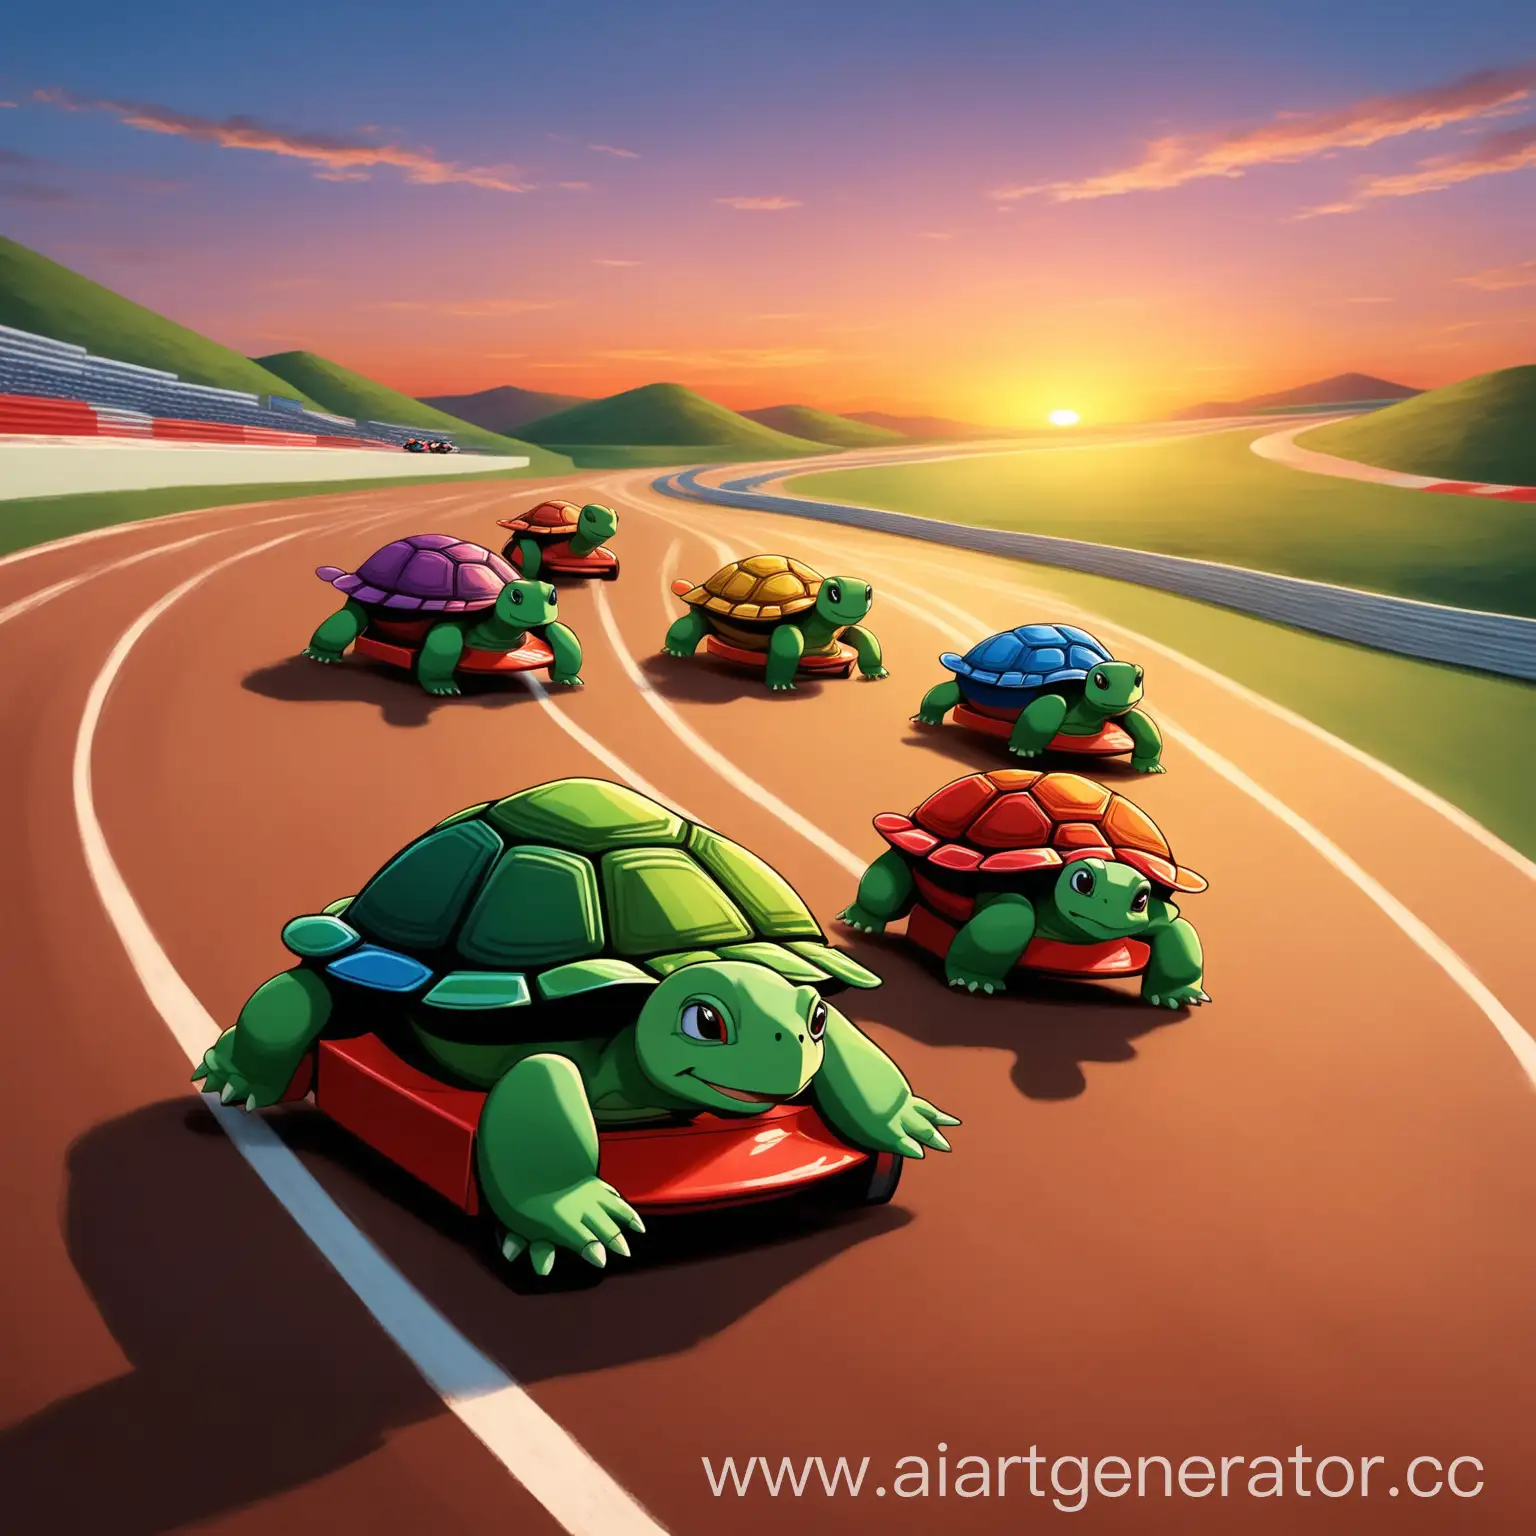 Race track on a hilly area during sunset. Five turtles of different colors, looking like racing cars, prepare to race, spinning their legs like wheels.